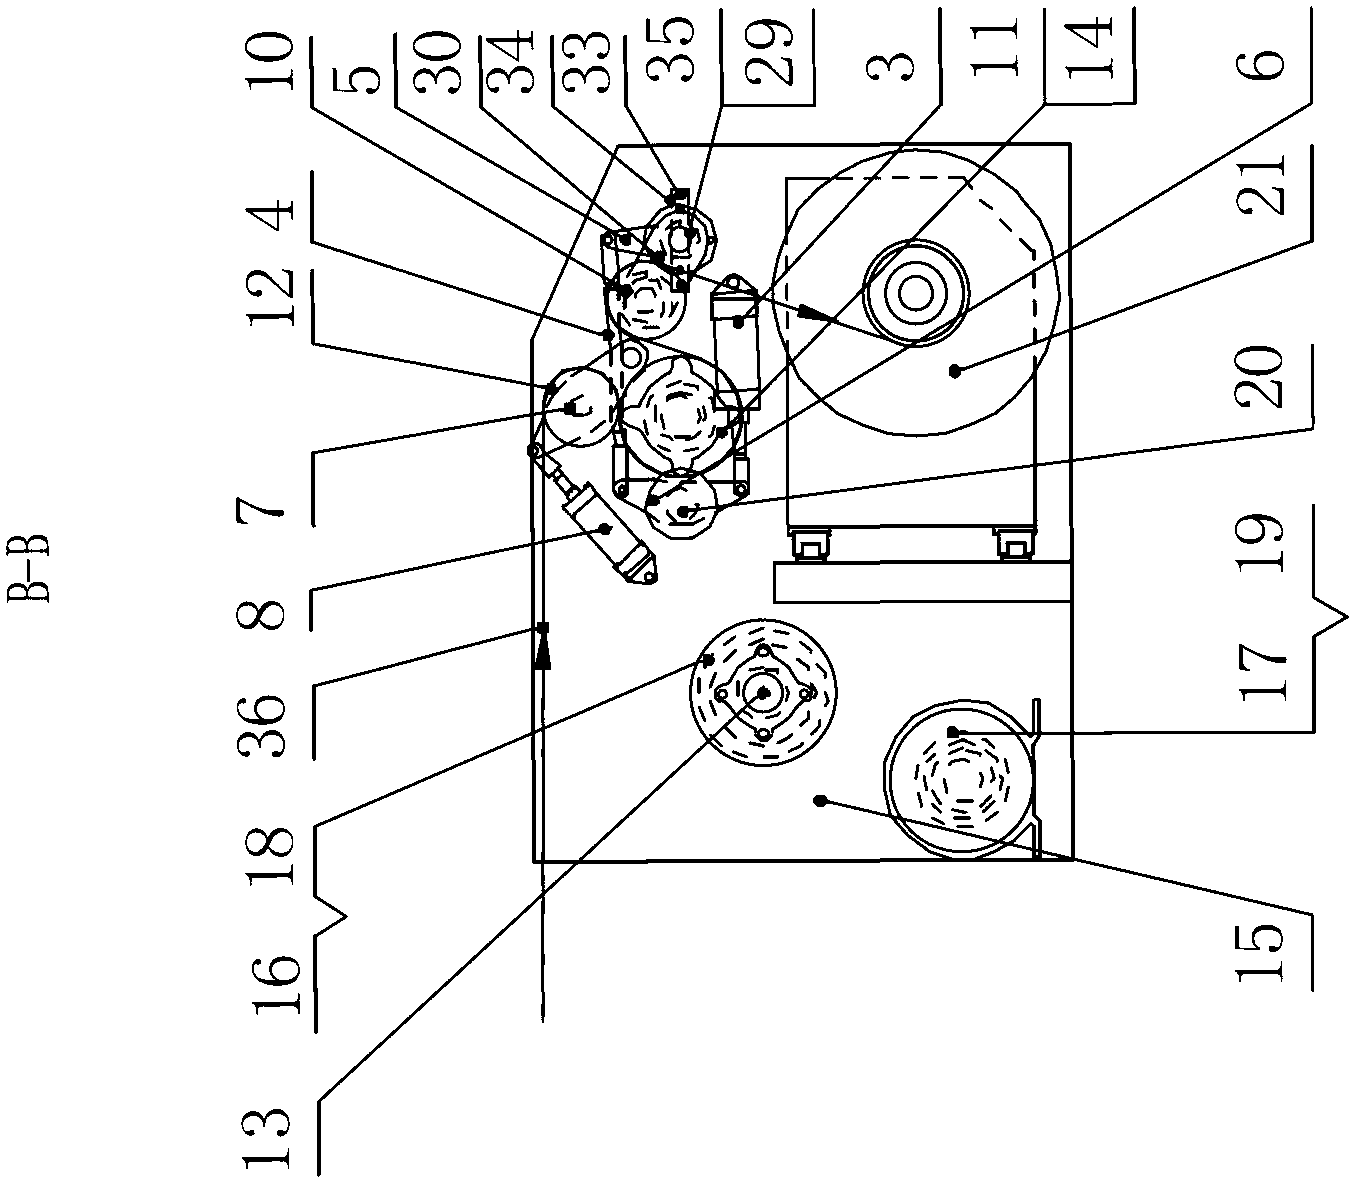 Floating roll feedback type yarn tension control device of one-time warping machine